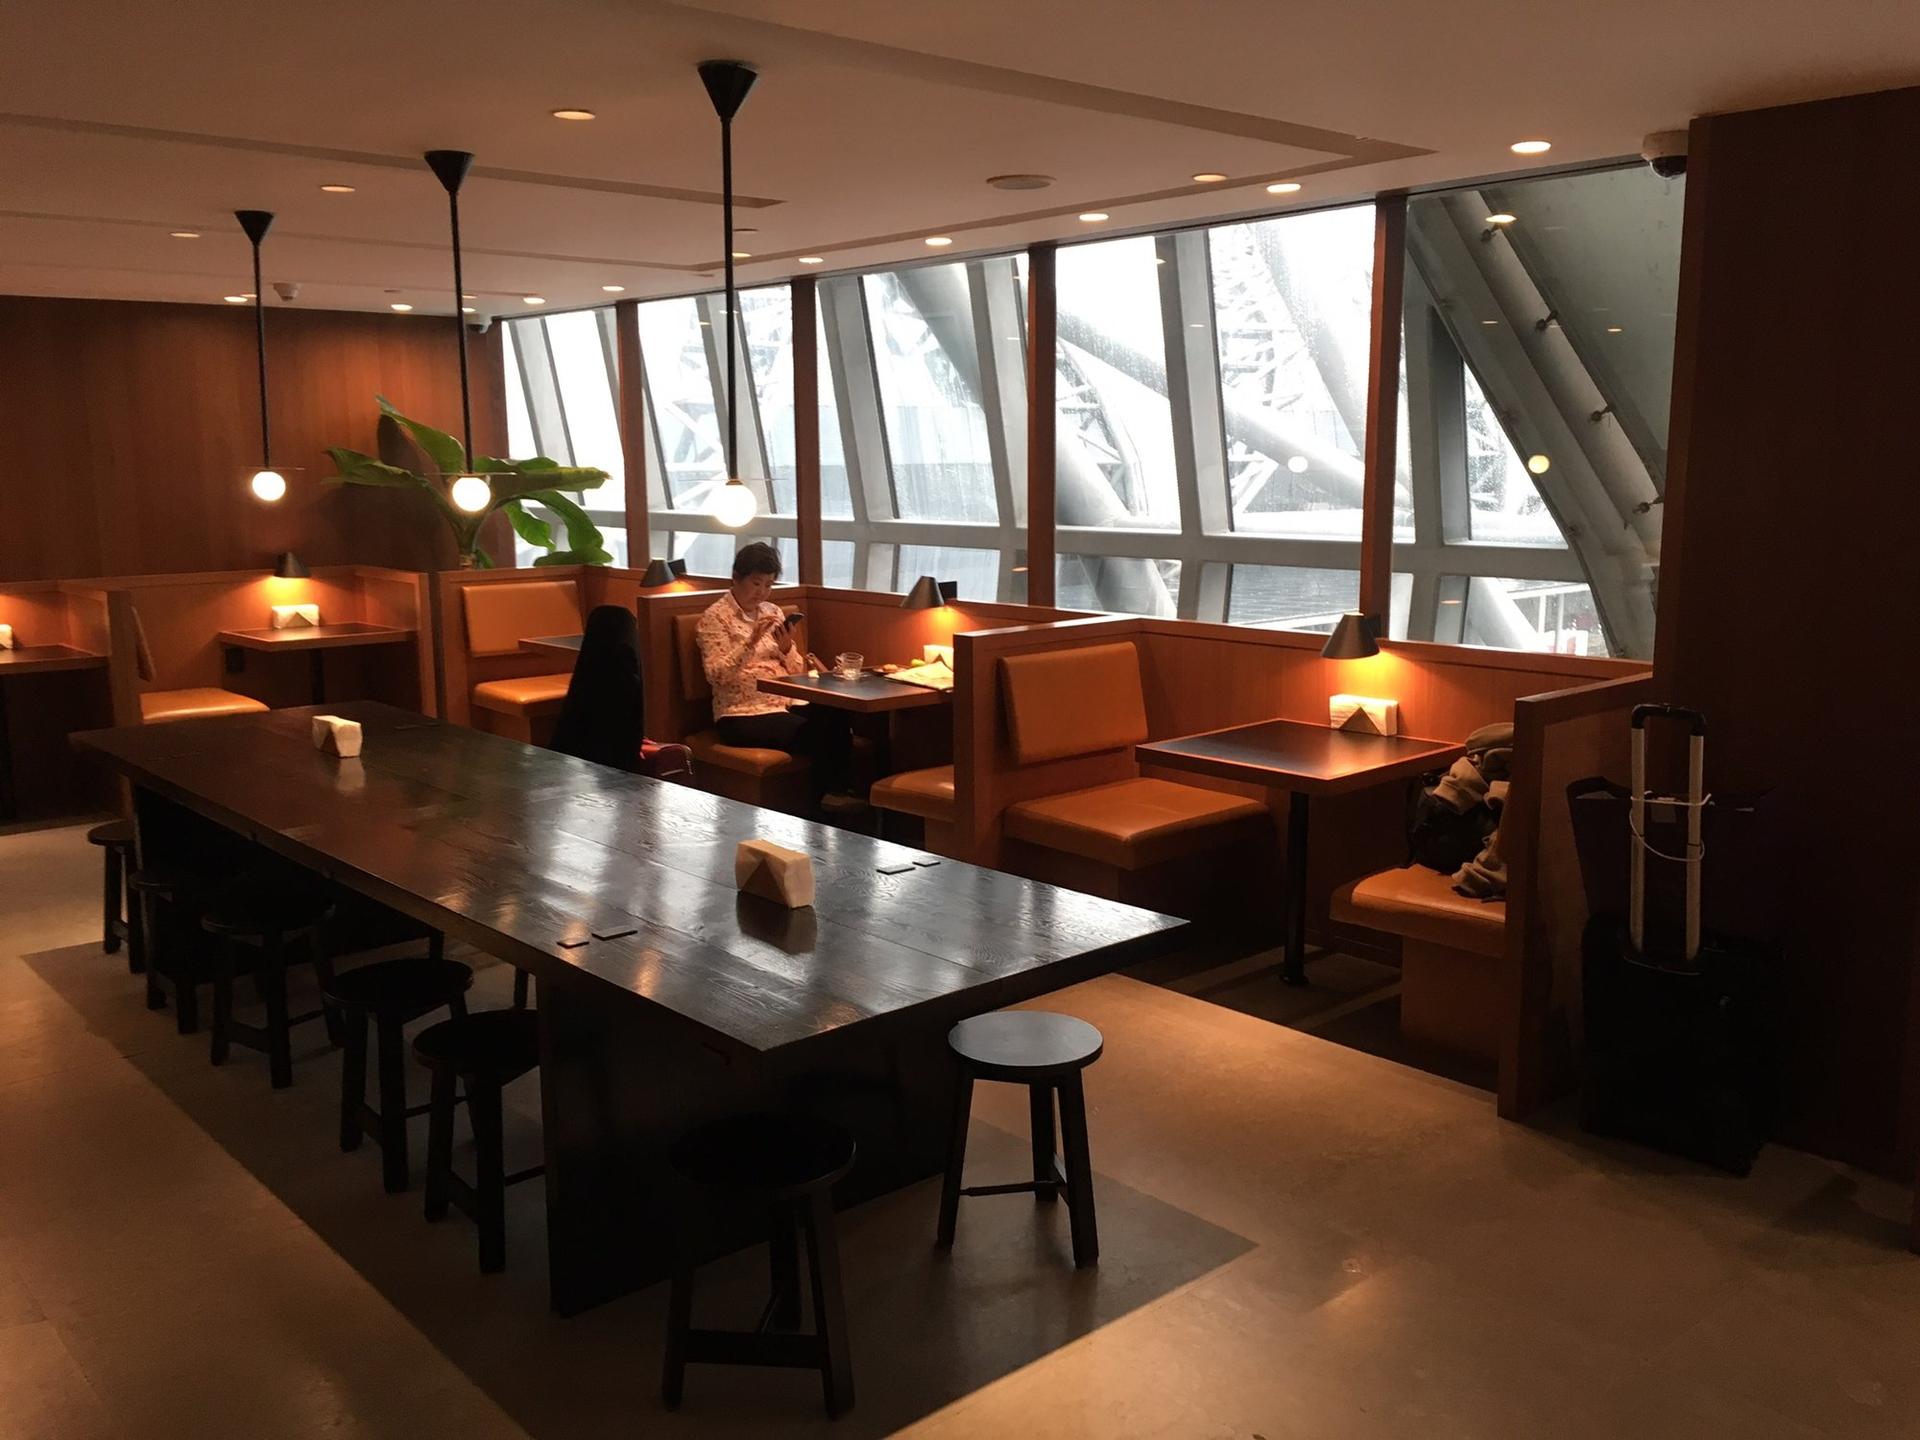 Cathay Pacific First and Business Class Lounge image 10 of 69